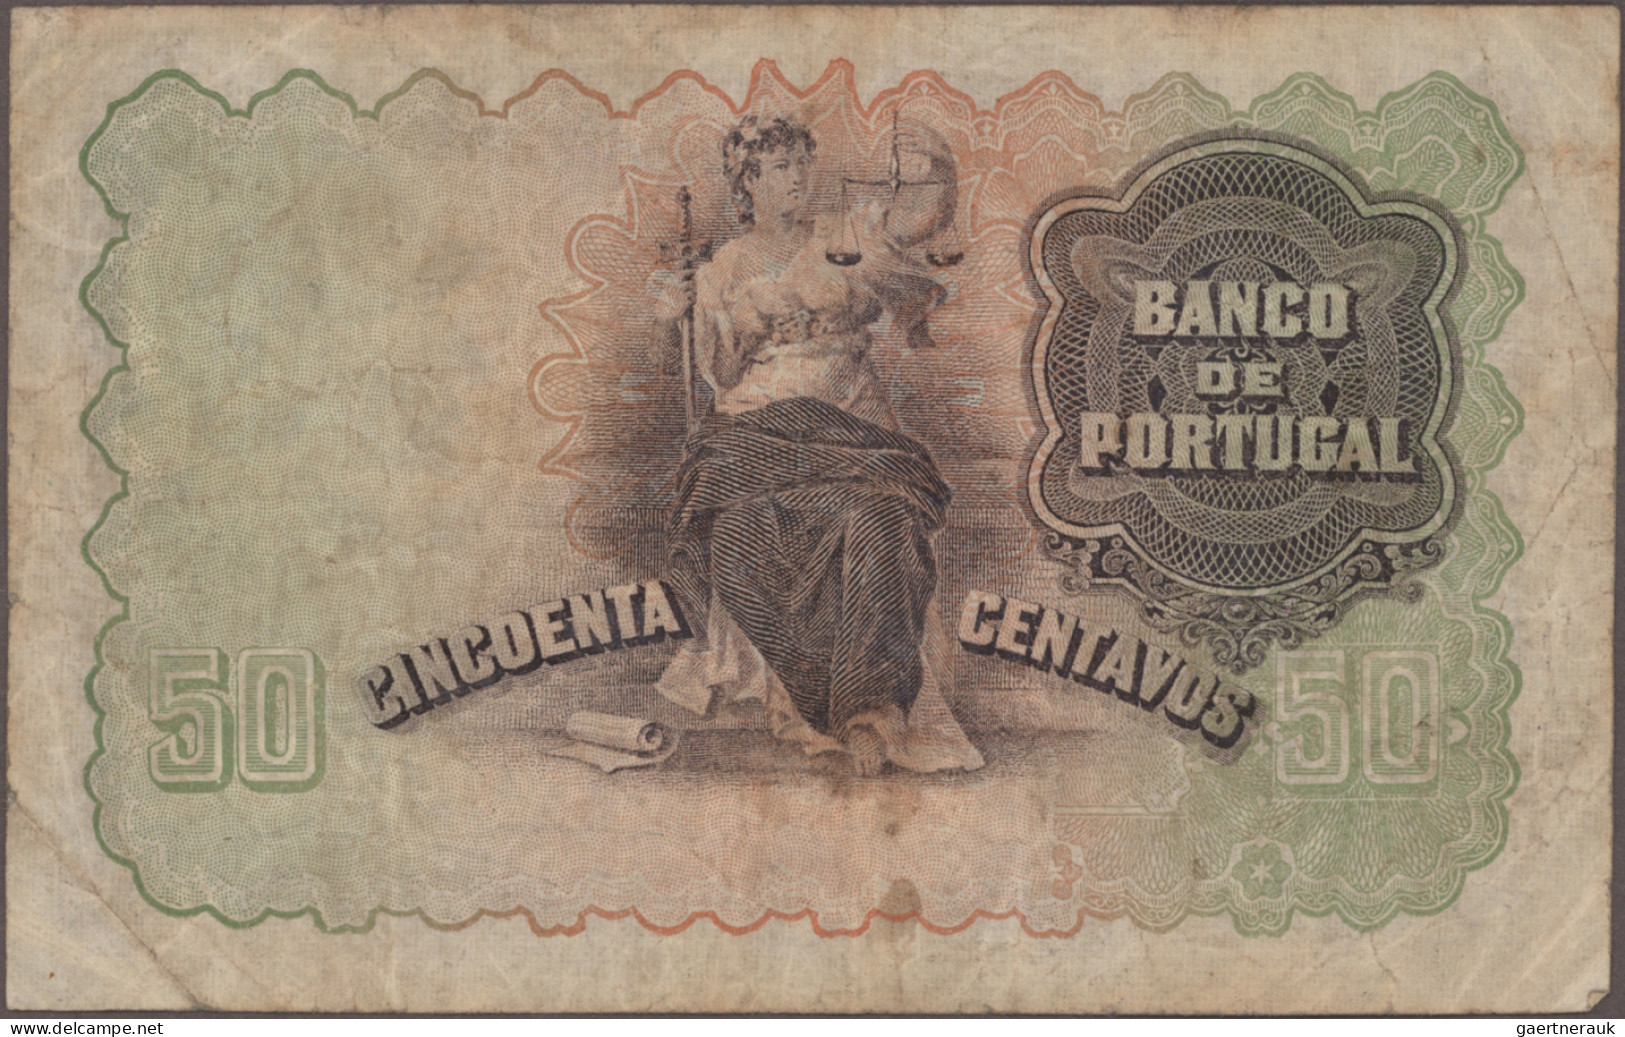 Portugal: Imperial Treasury and Casa da Moeda, lot with 12 banknotes, series 182